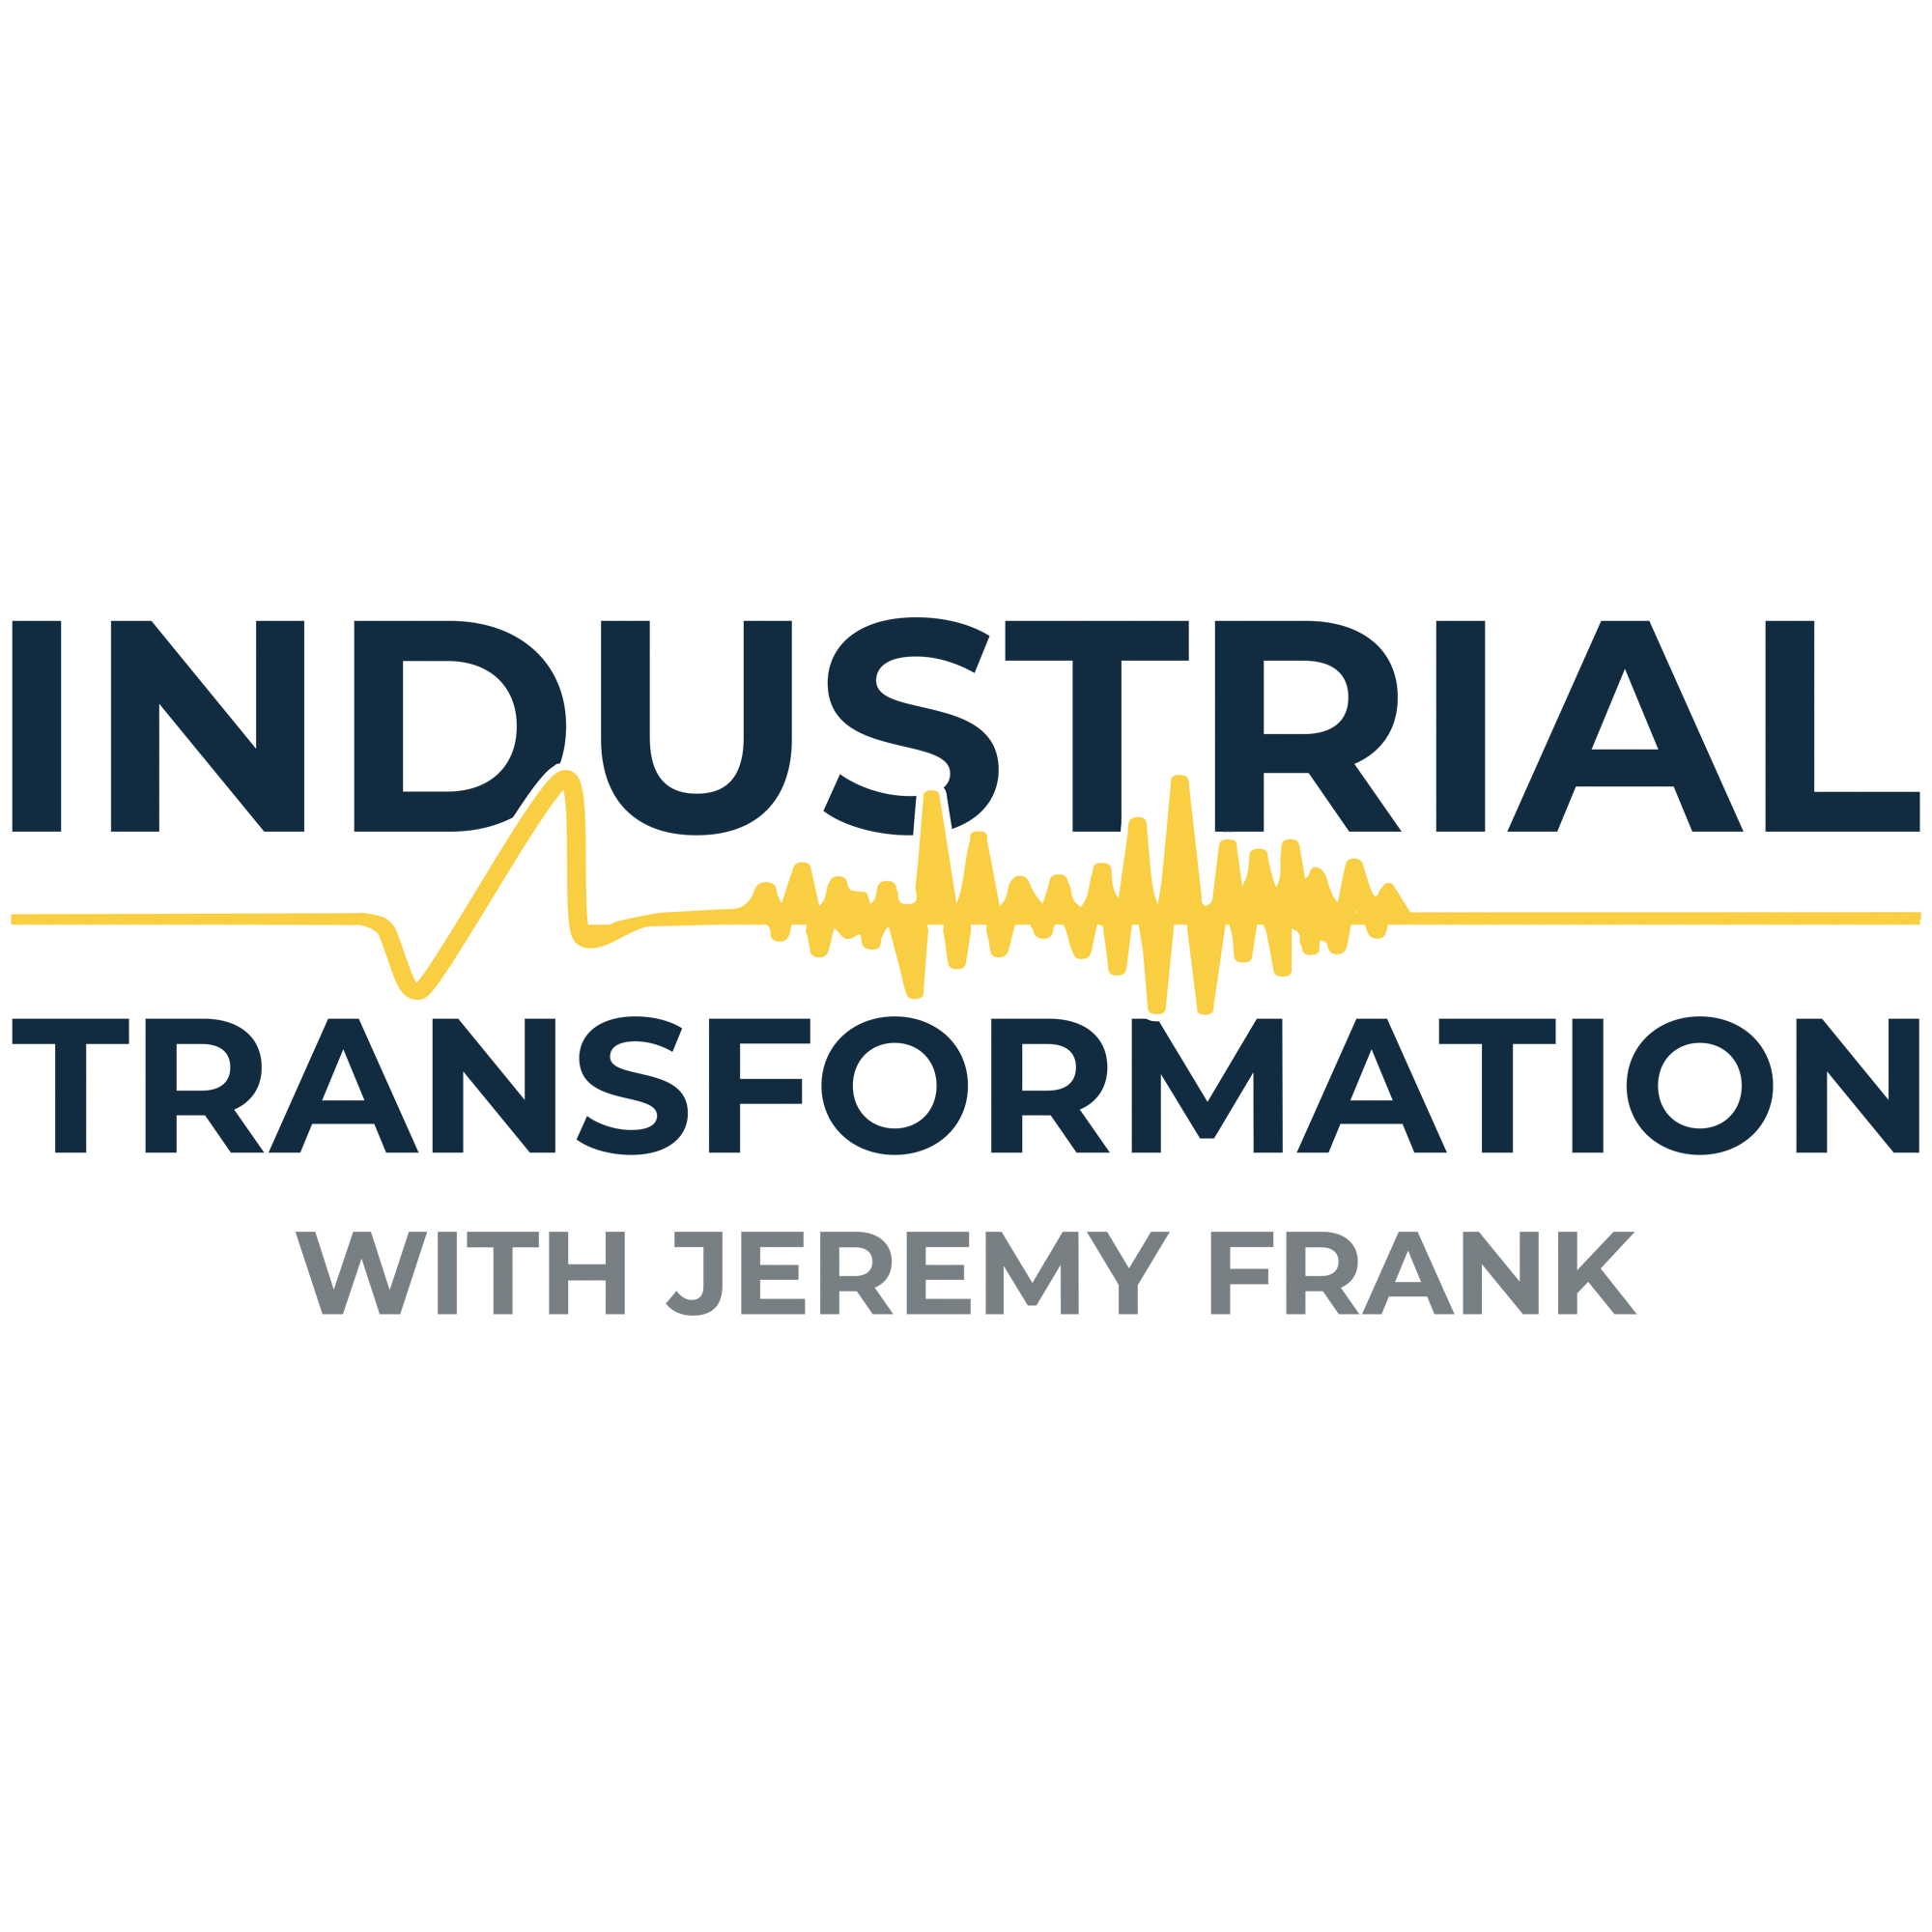 Industrial Transformation with Jeremy Frank